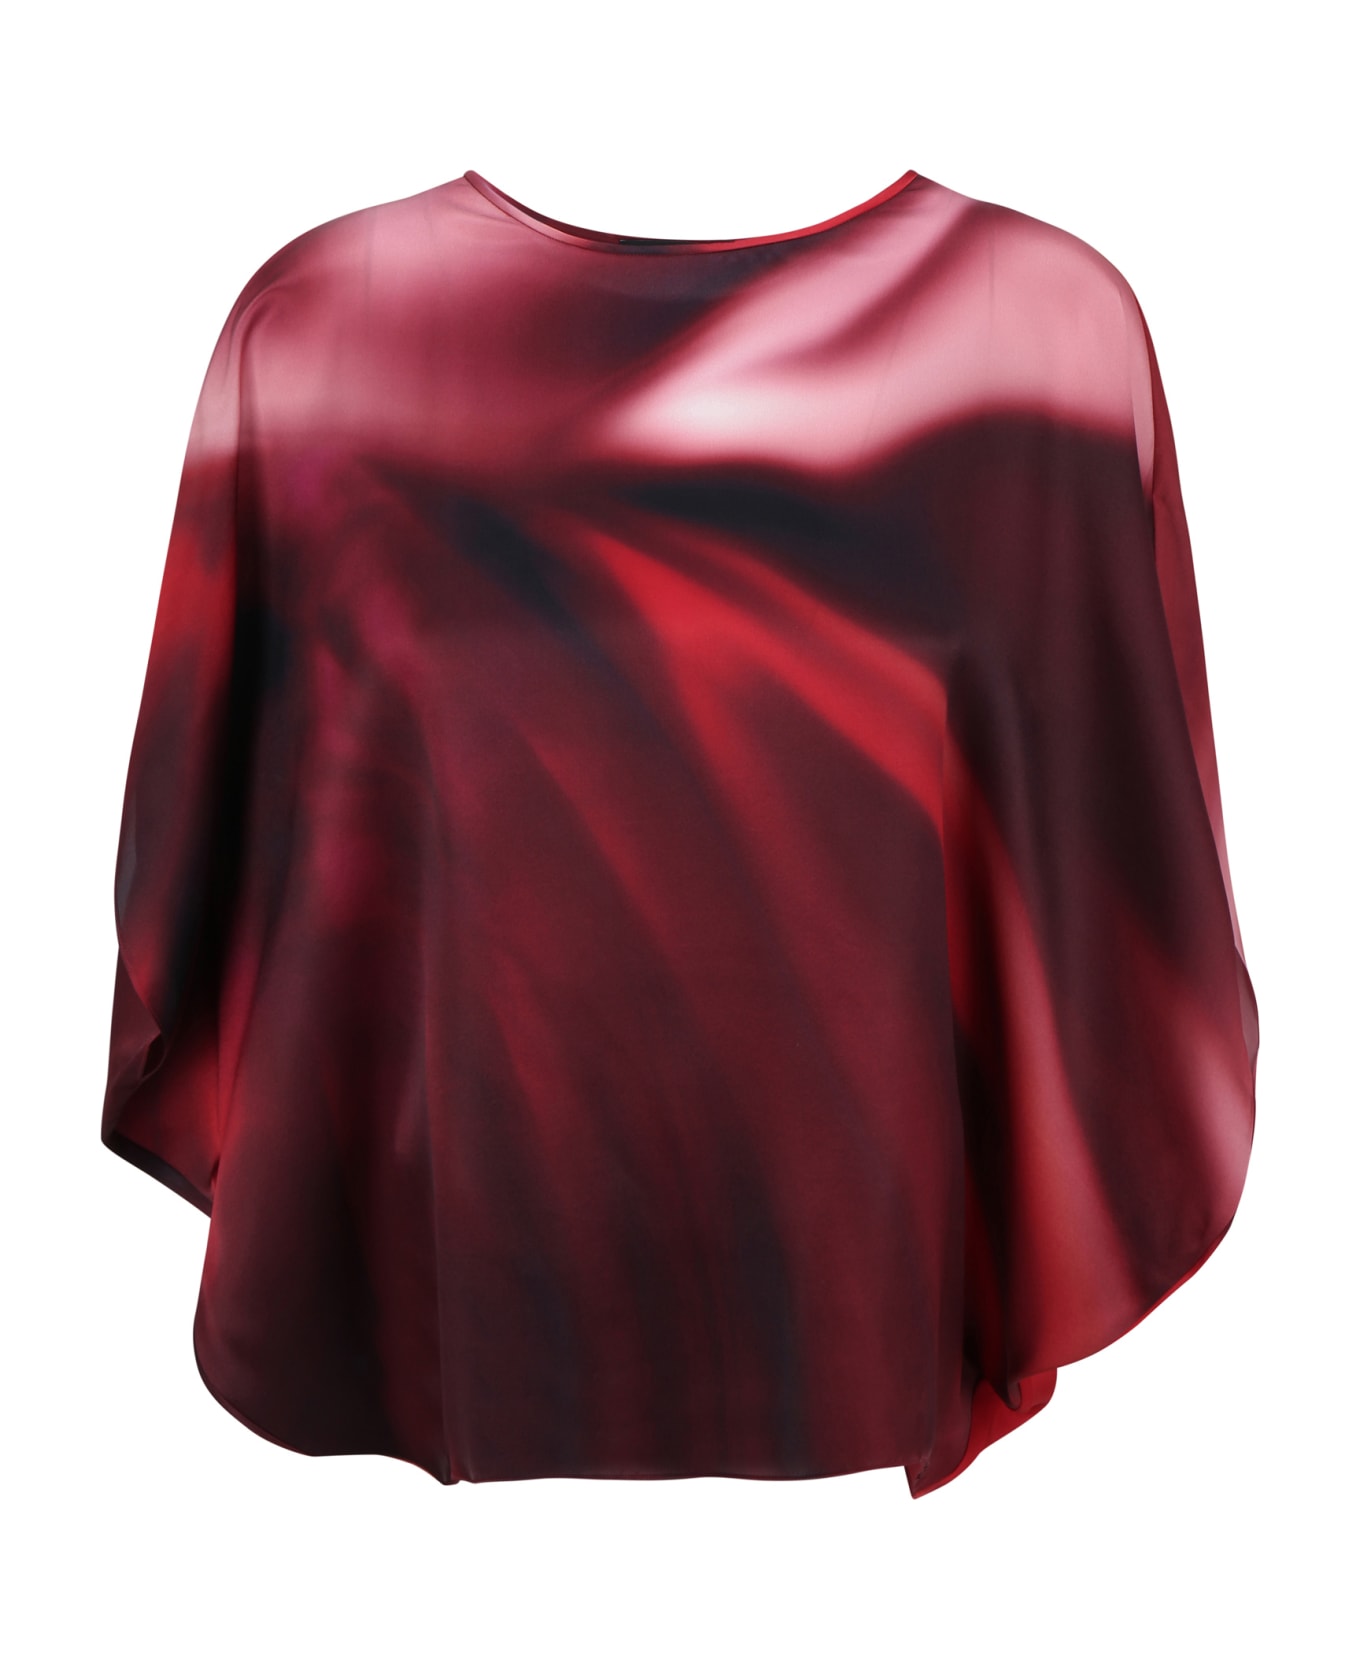 Gianluca Capannolo Iris Top - Red/pink ブラウス